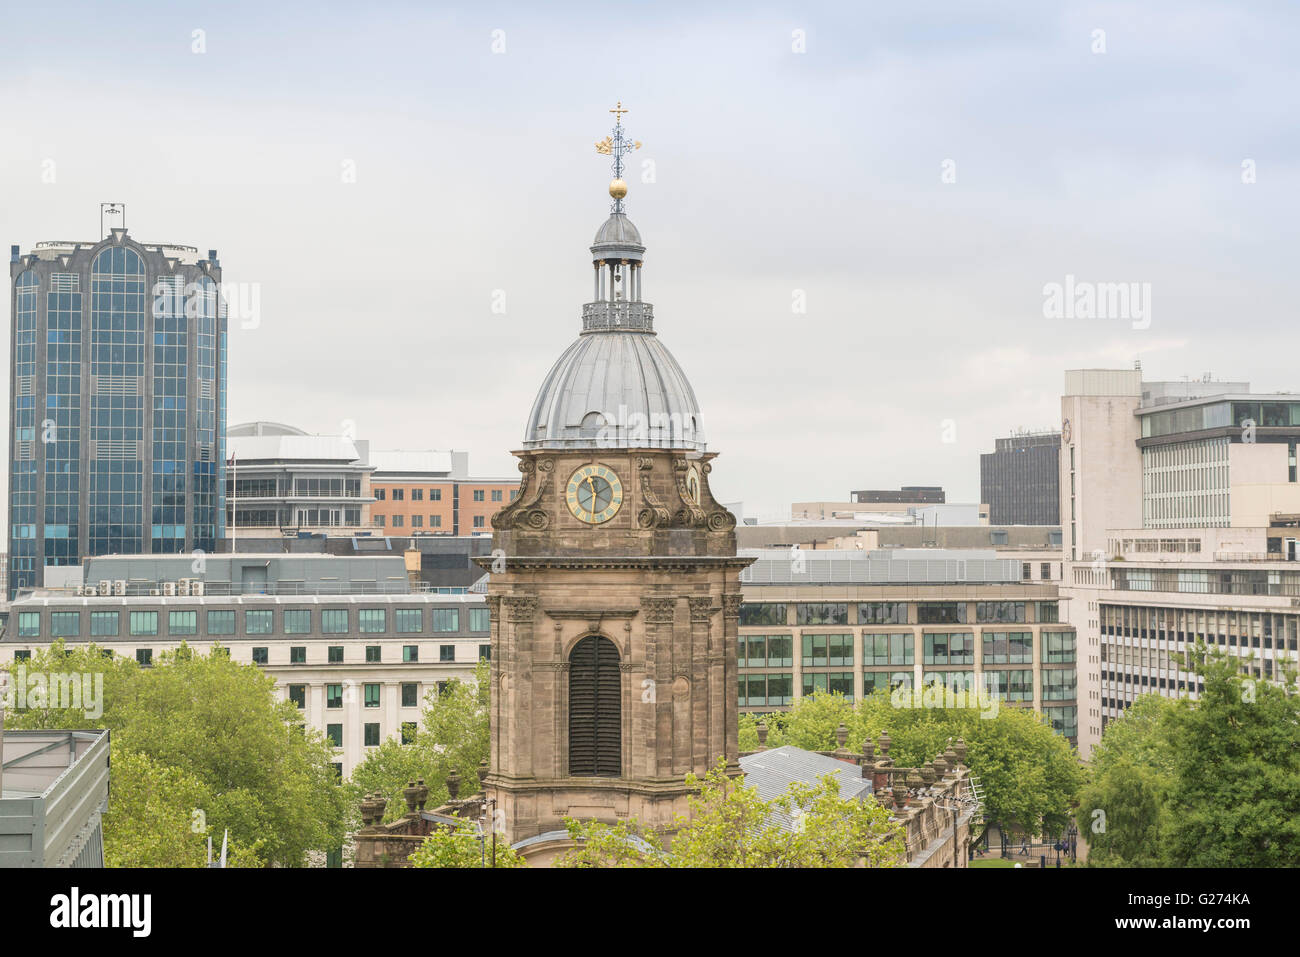 ST. PHILLIPS CATHEDRAL, BIRMINGHAM, WEST MIDLANDS, ENGLAND. Stock Photo